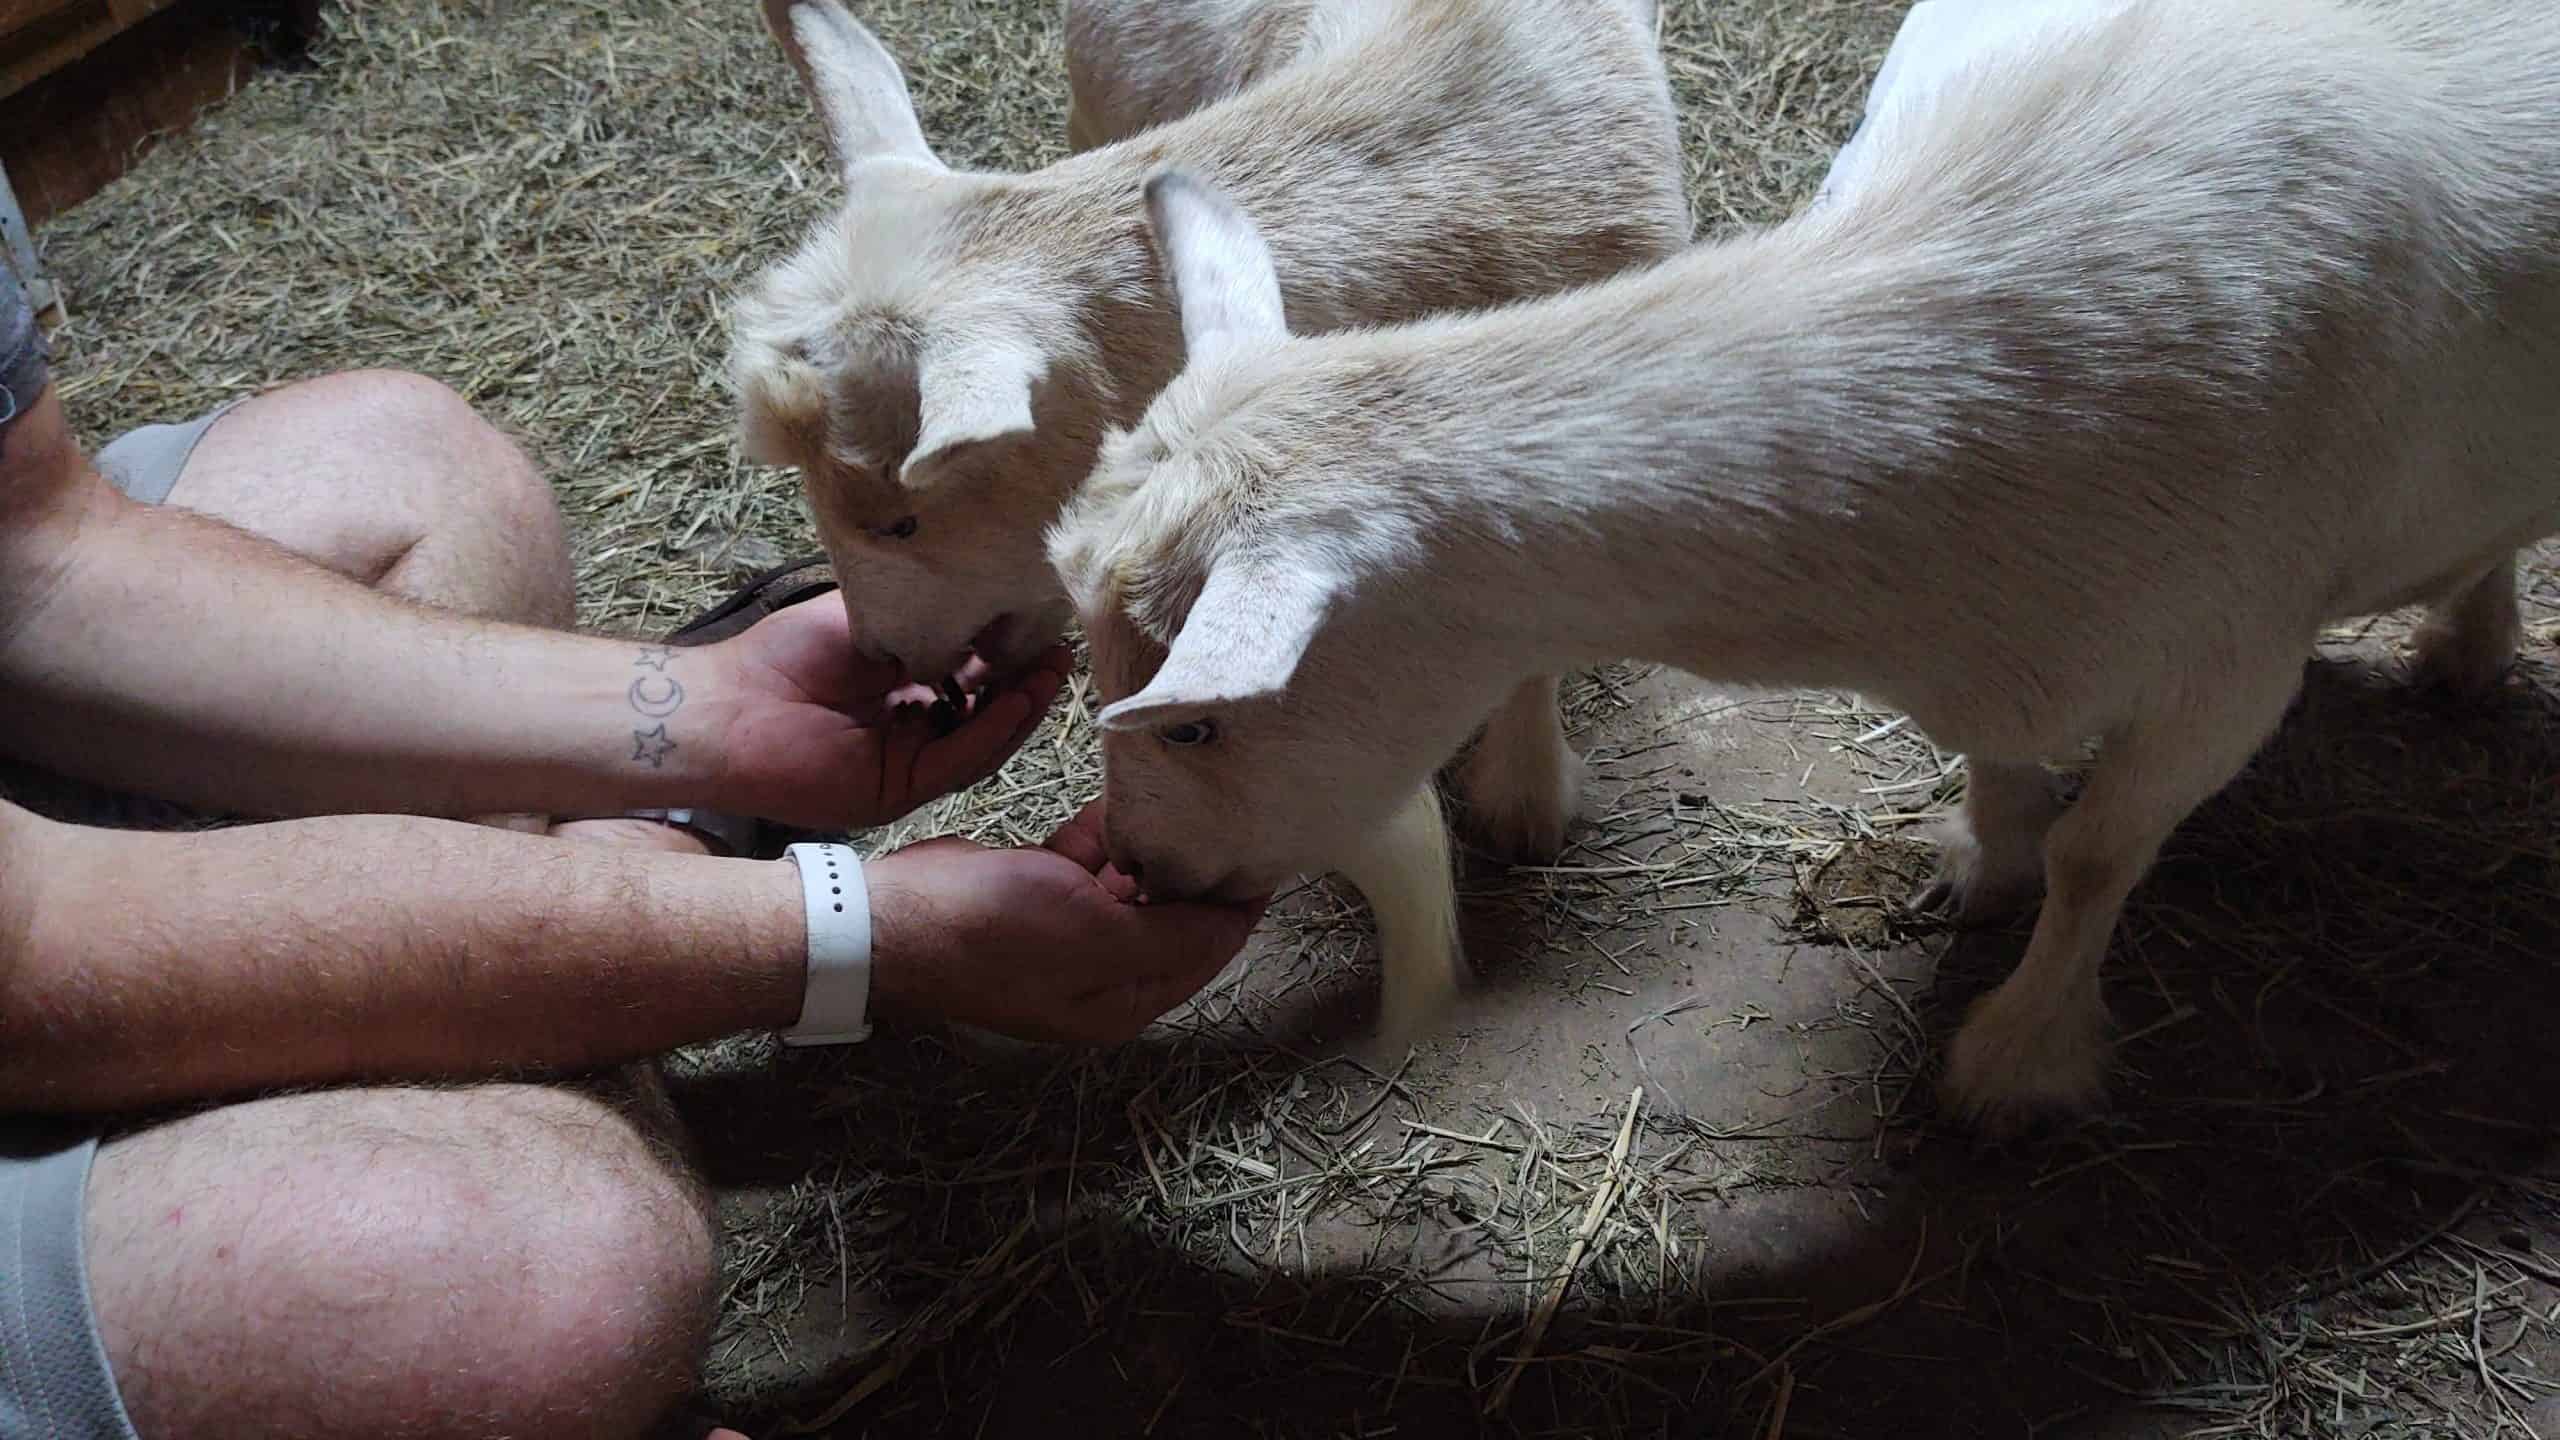 two goats eating food our of hands